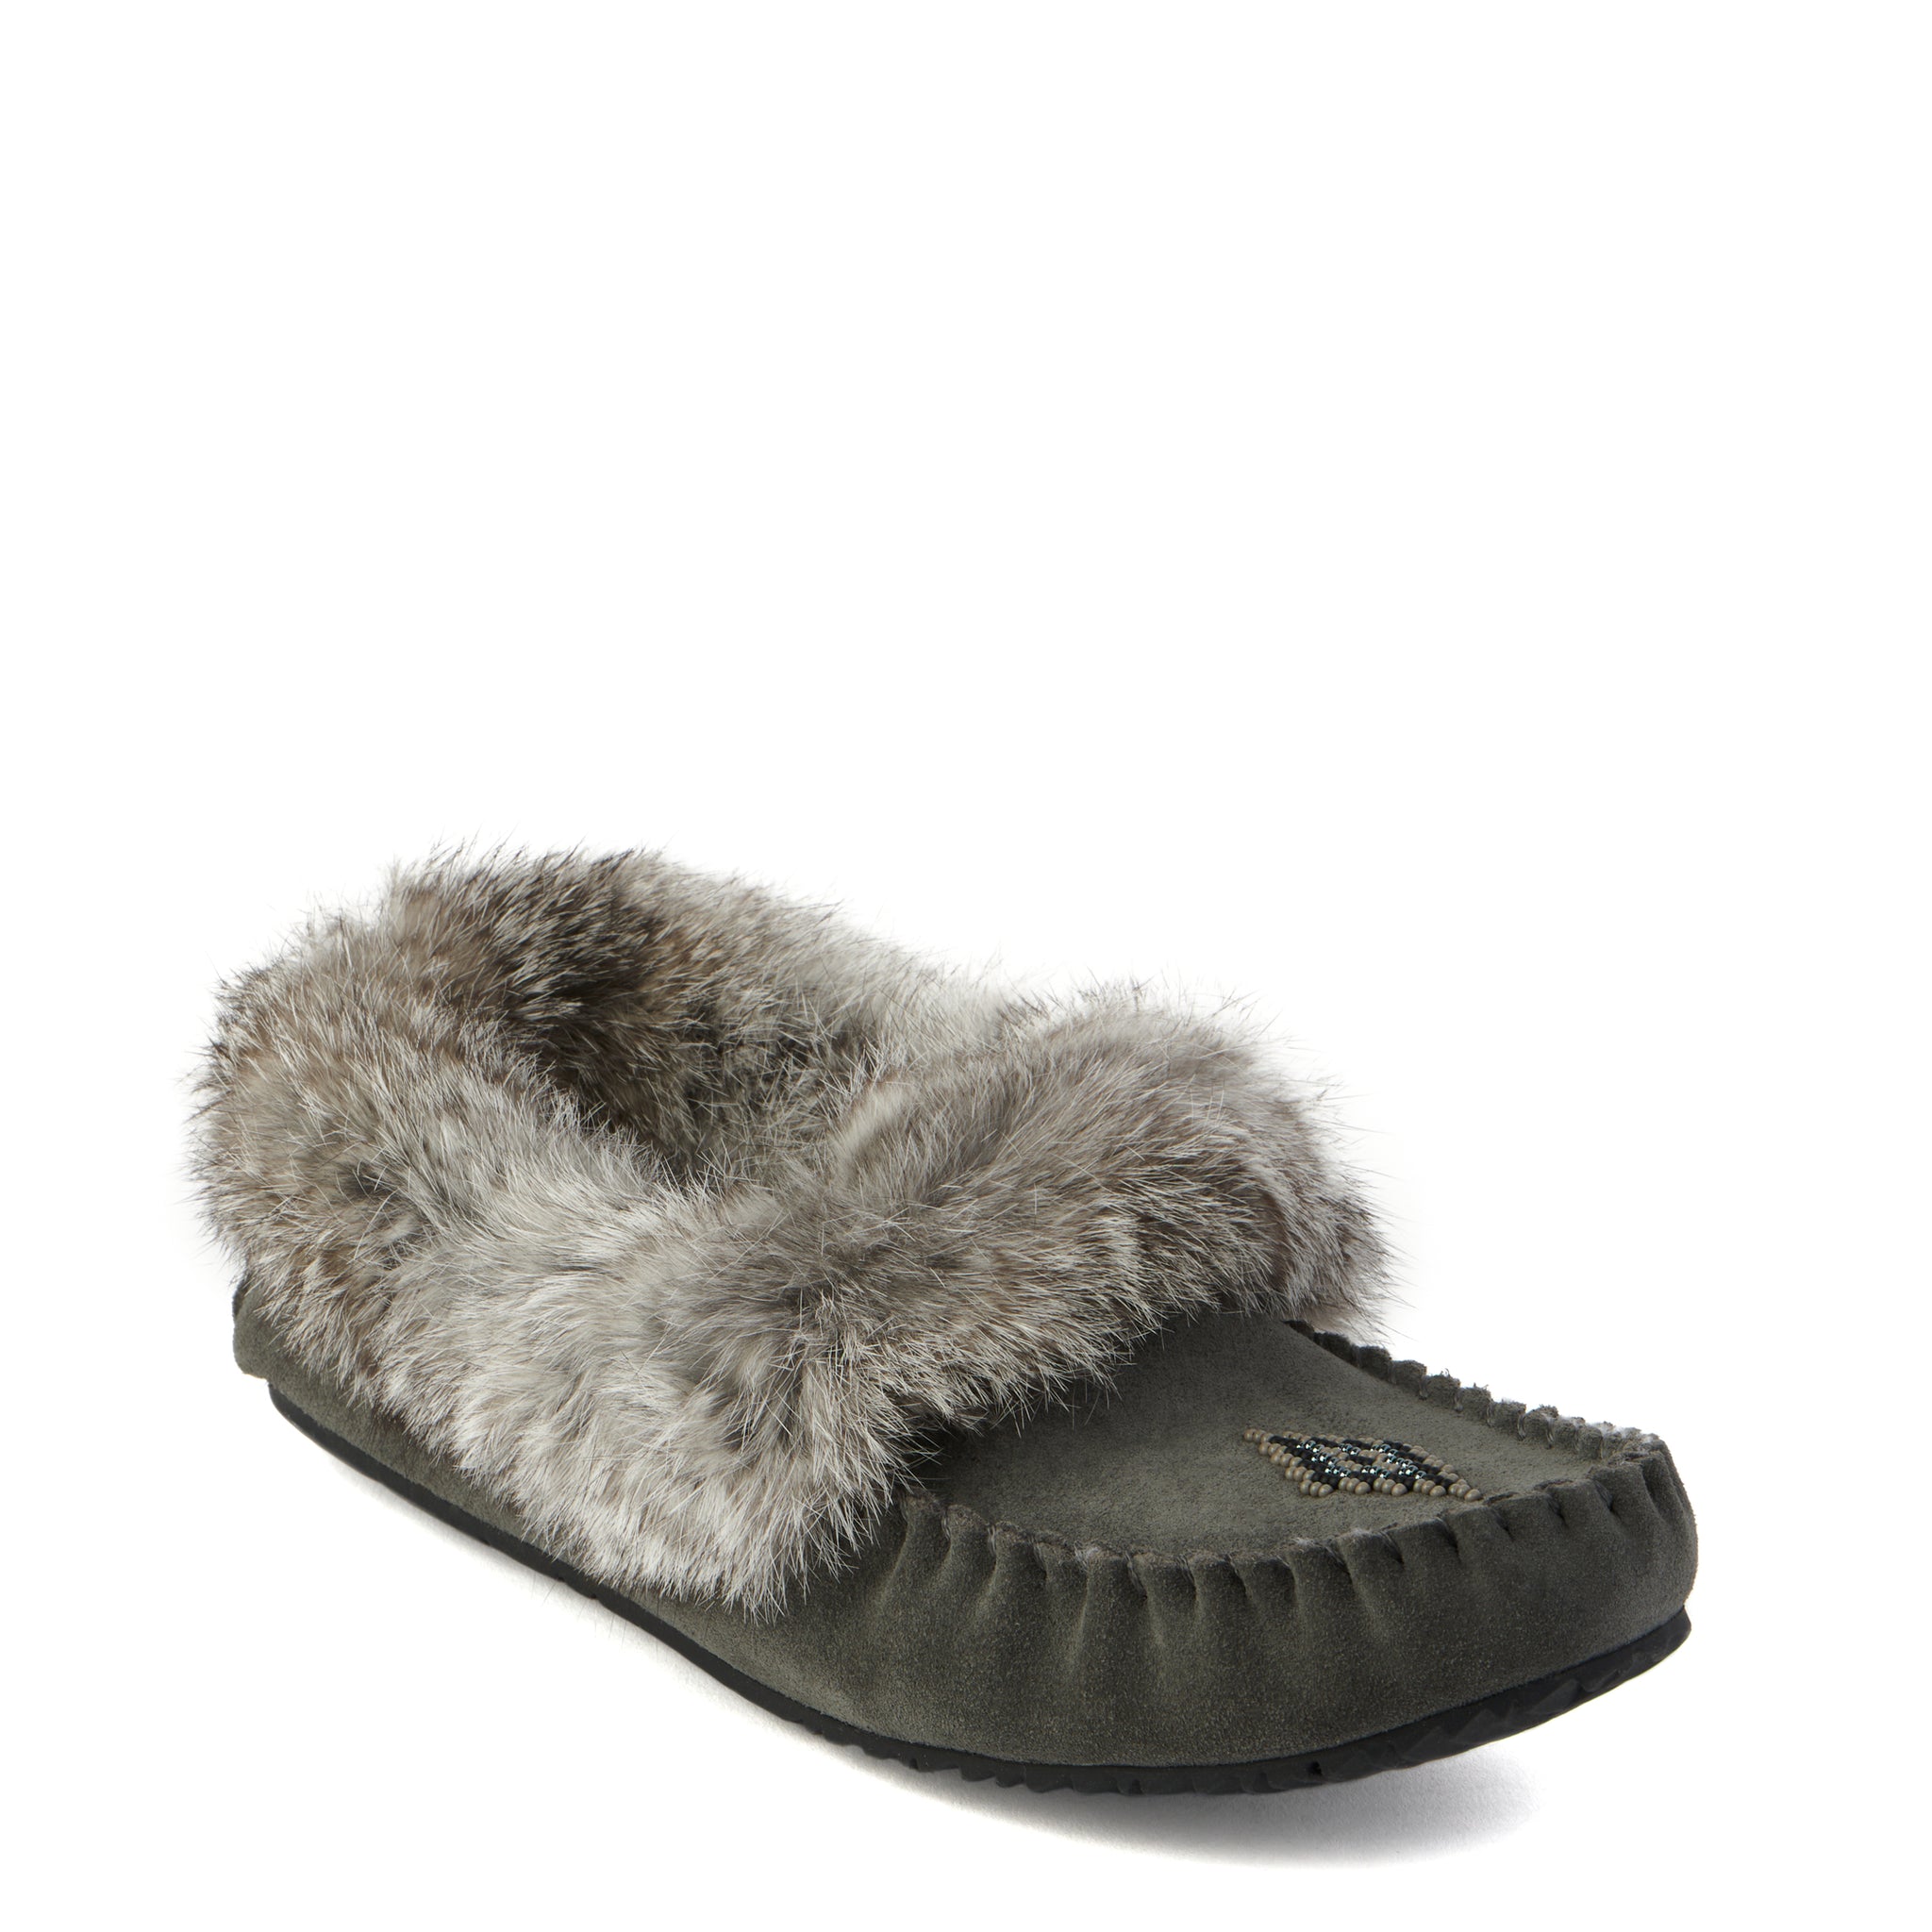 Street Moccasins - Charcoal